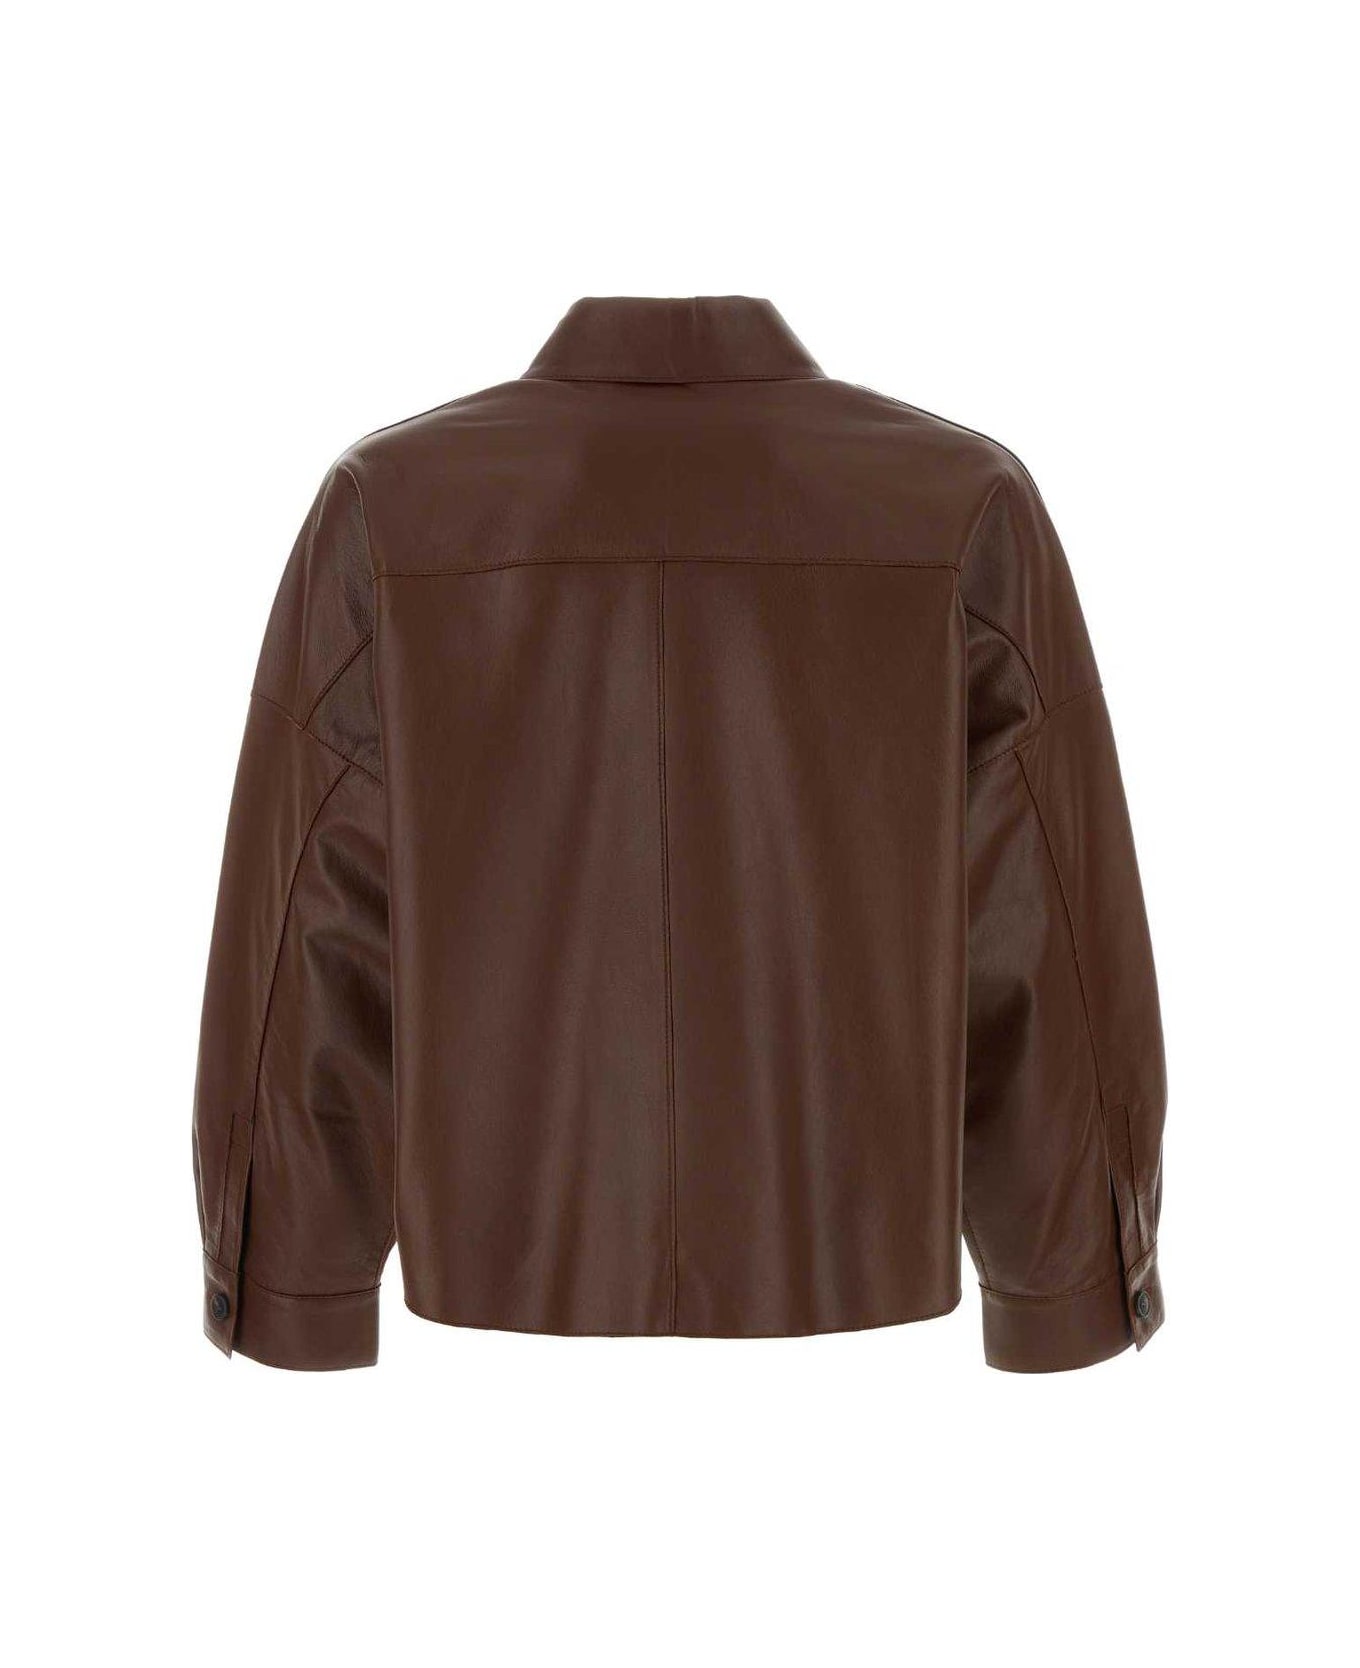 Weekend Max Mara Leather Jacket With Buttons - Marrone